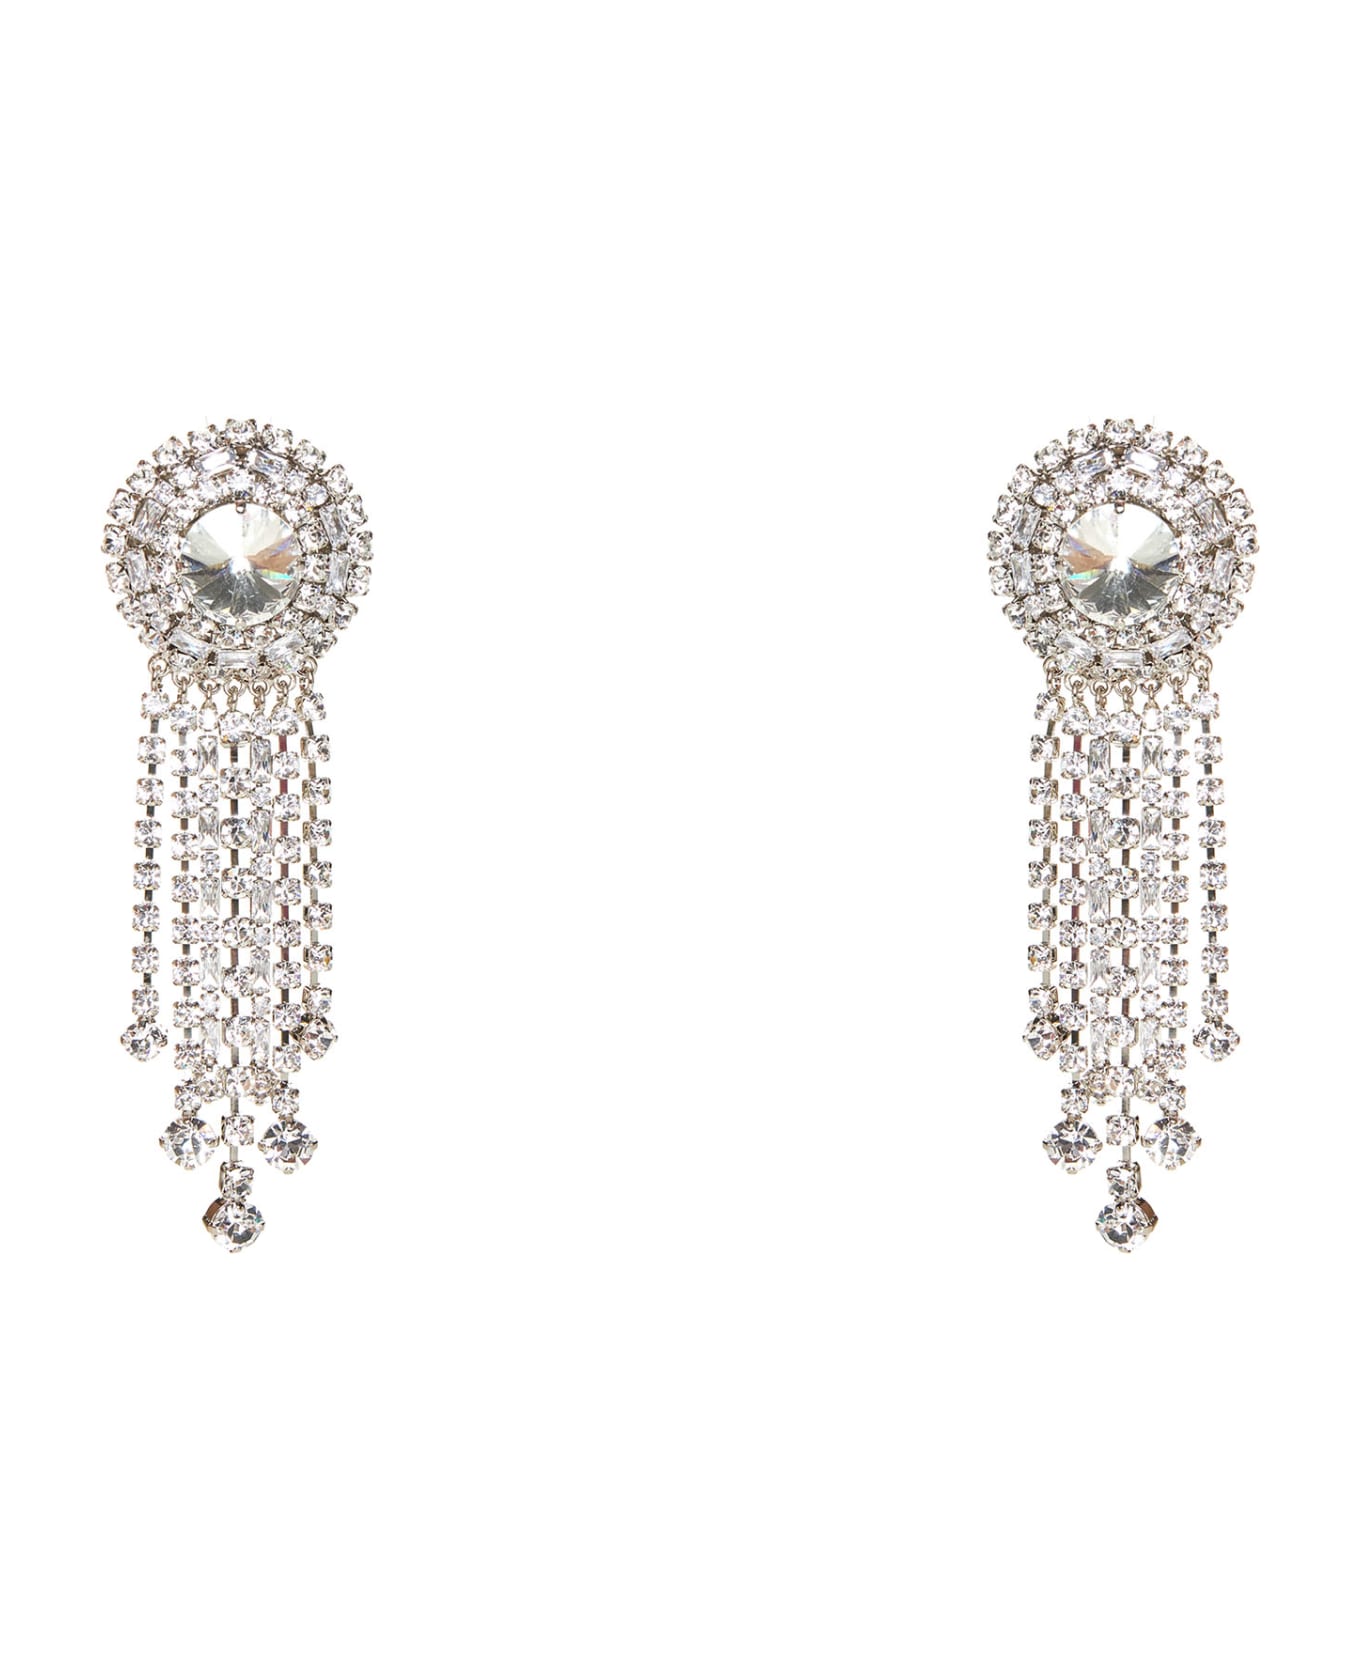 Alessandra Rich Earrings - Cry silver イヤリング